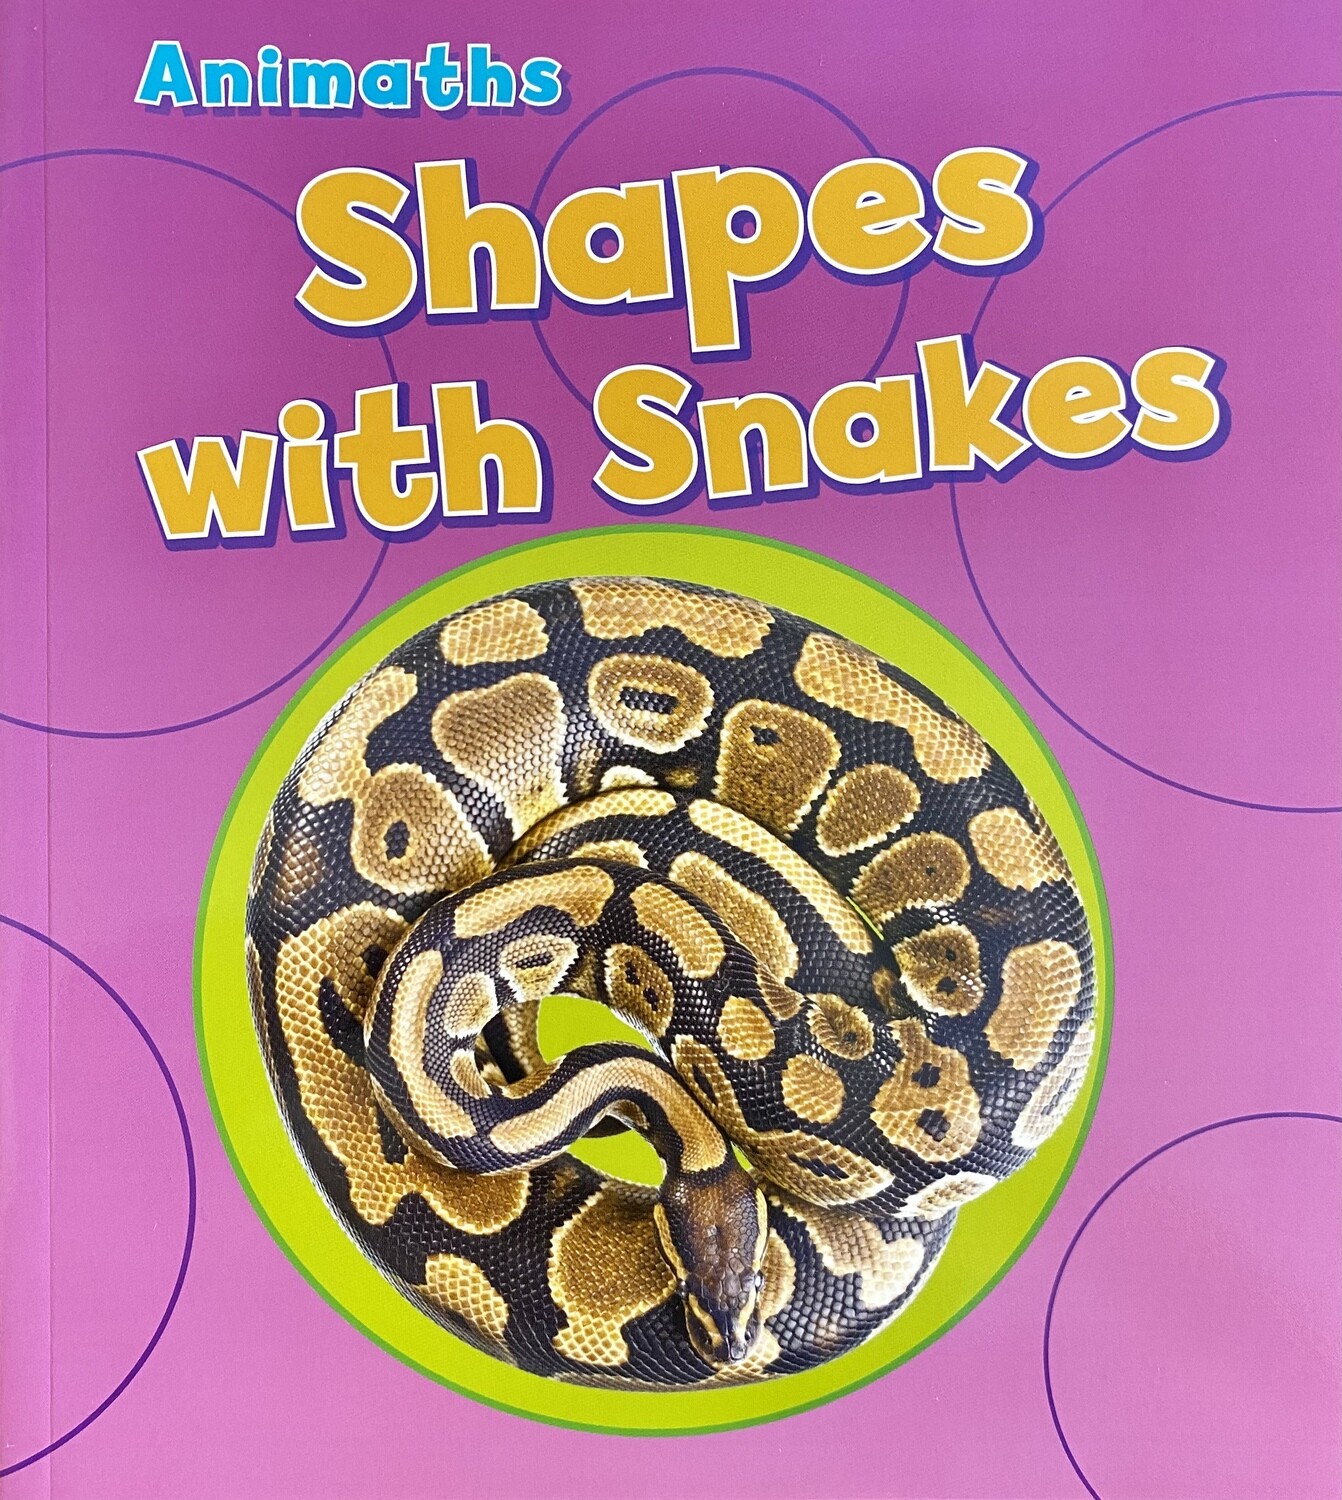 Animaths: Shapes with Snakes